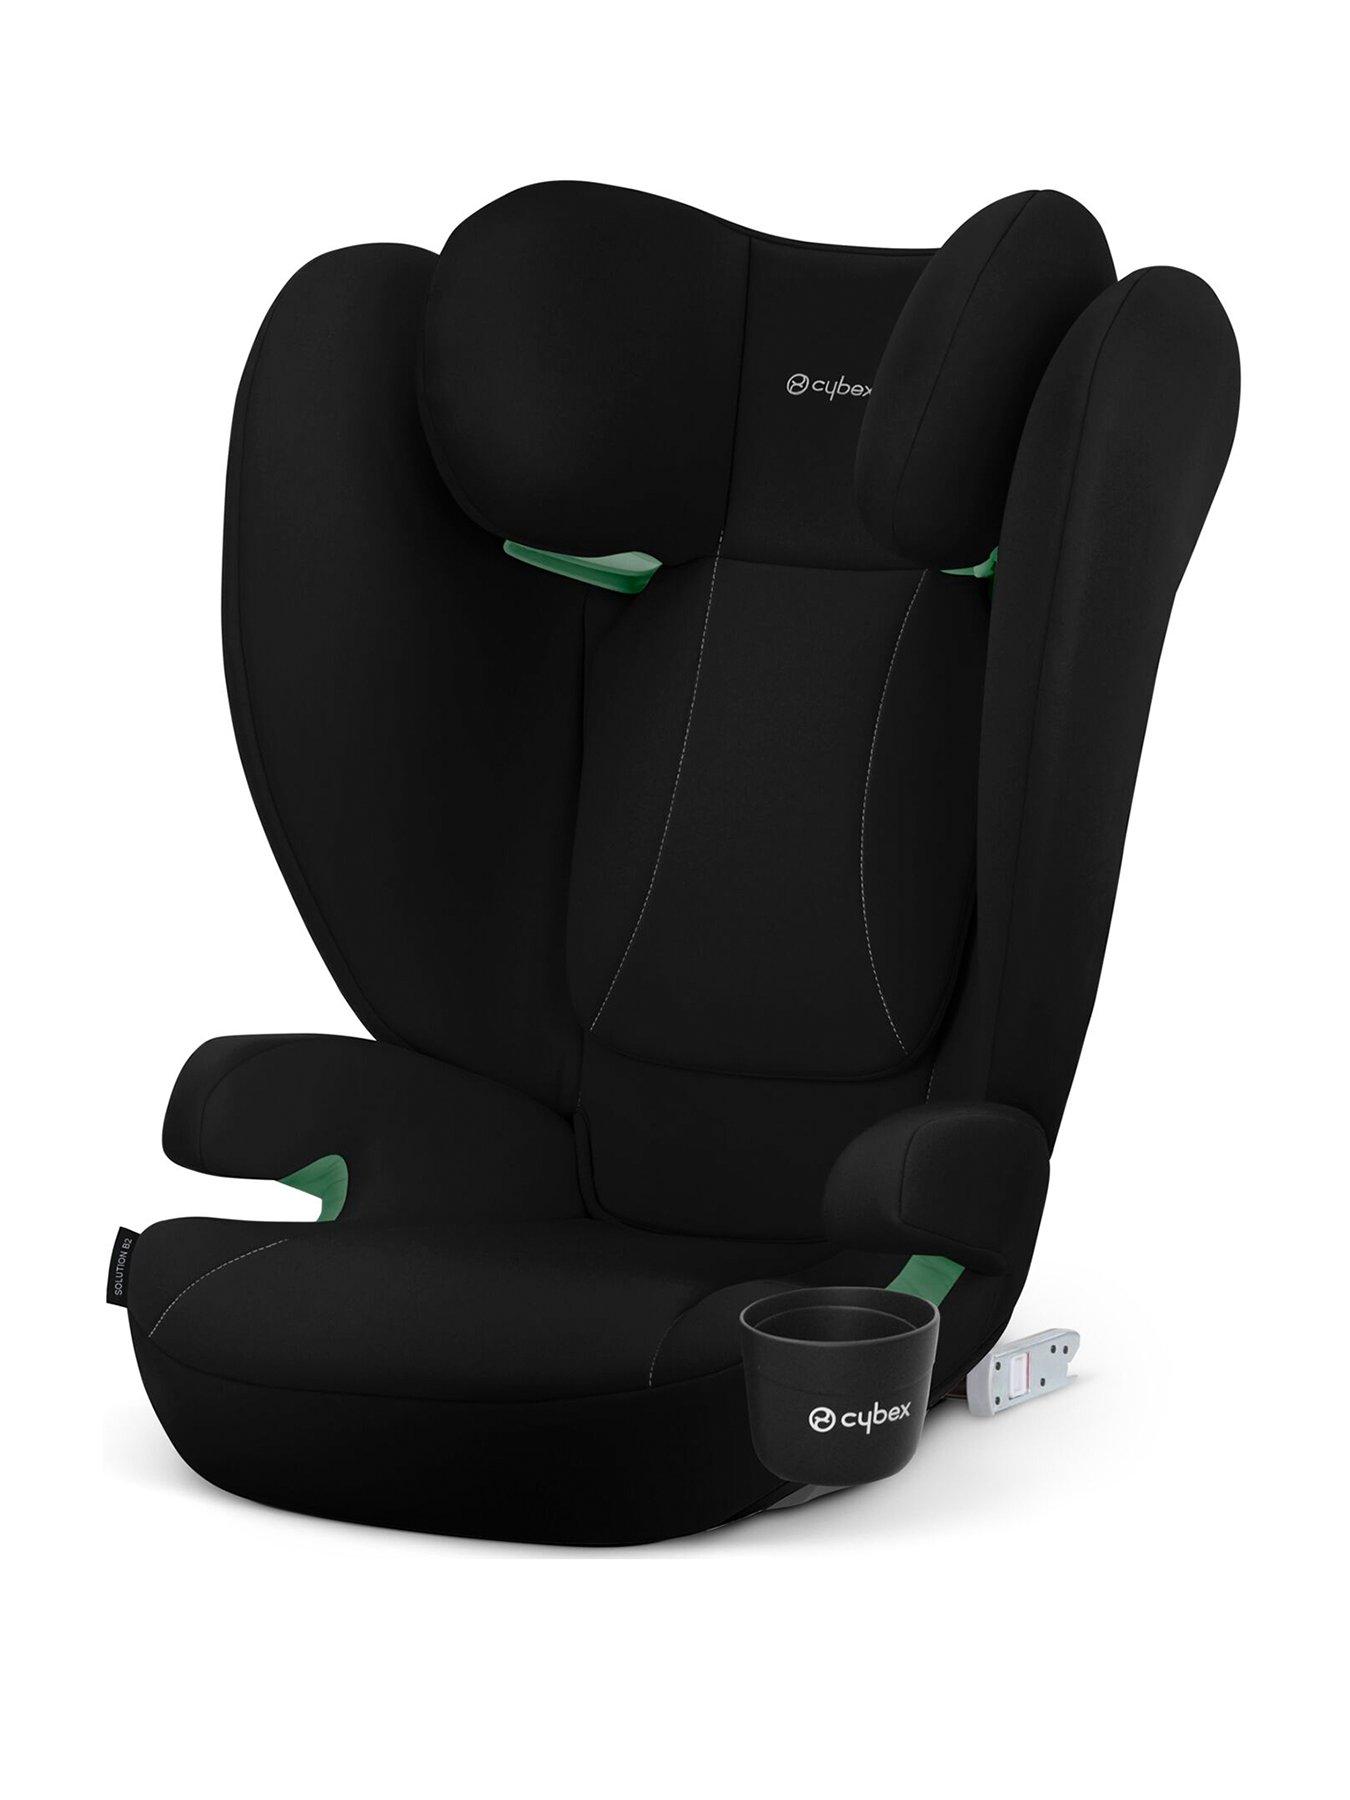 Cybex Solution S2 i-Fix Highback Booster Car Seat - Deep Black from